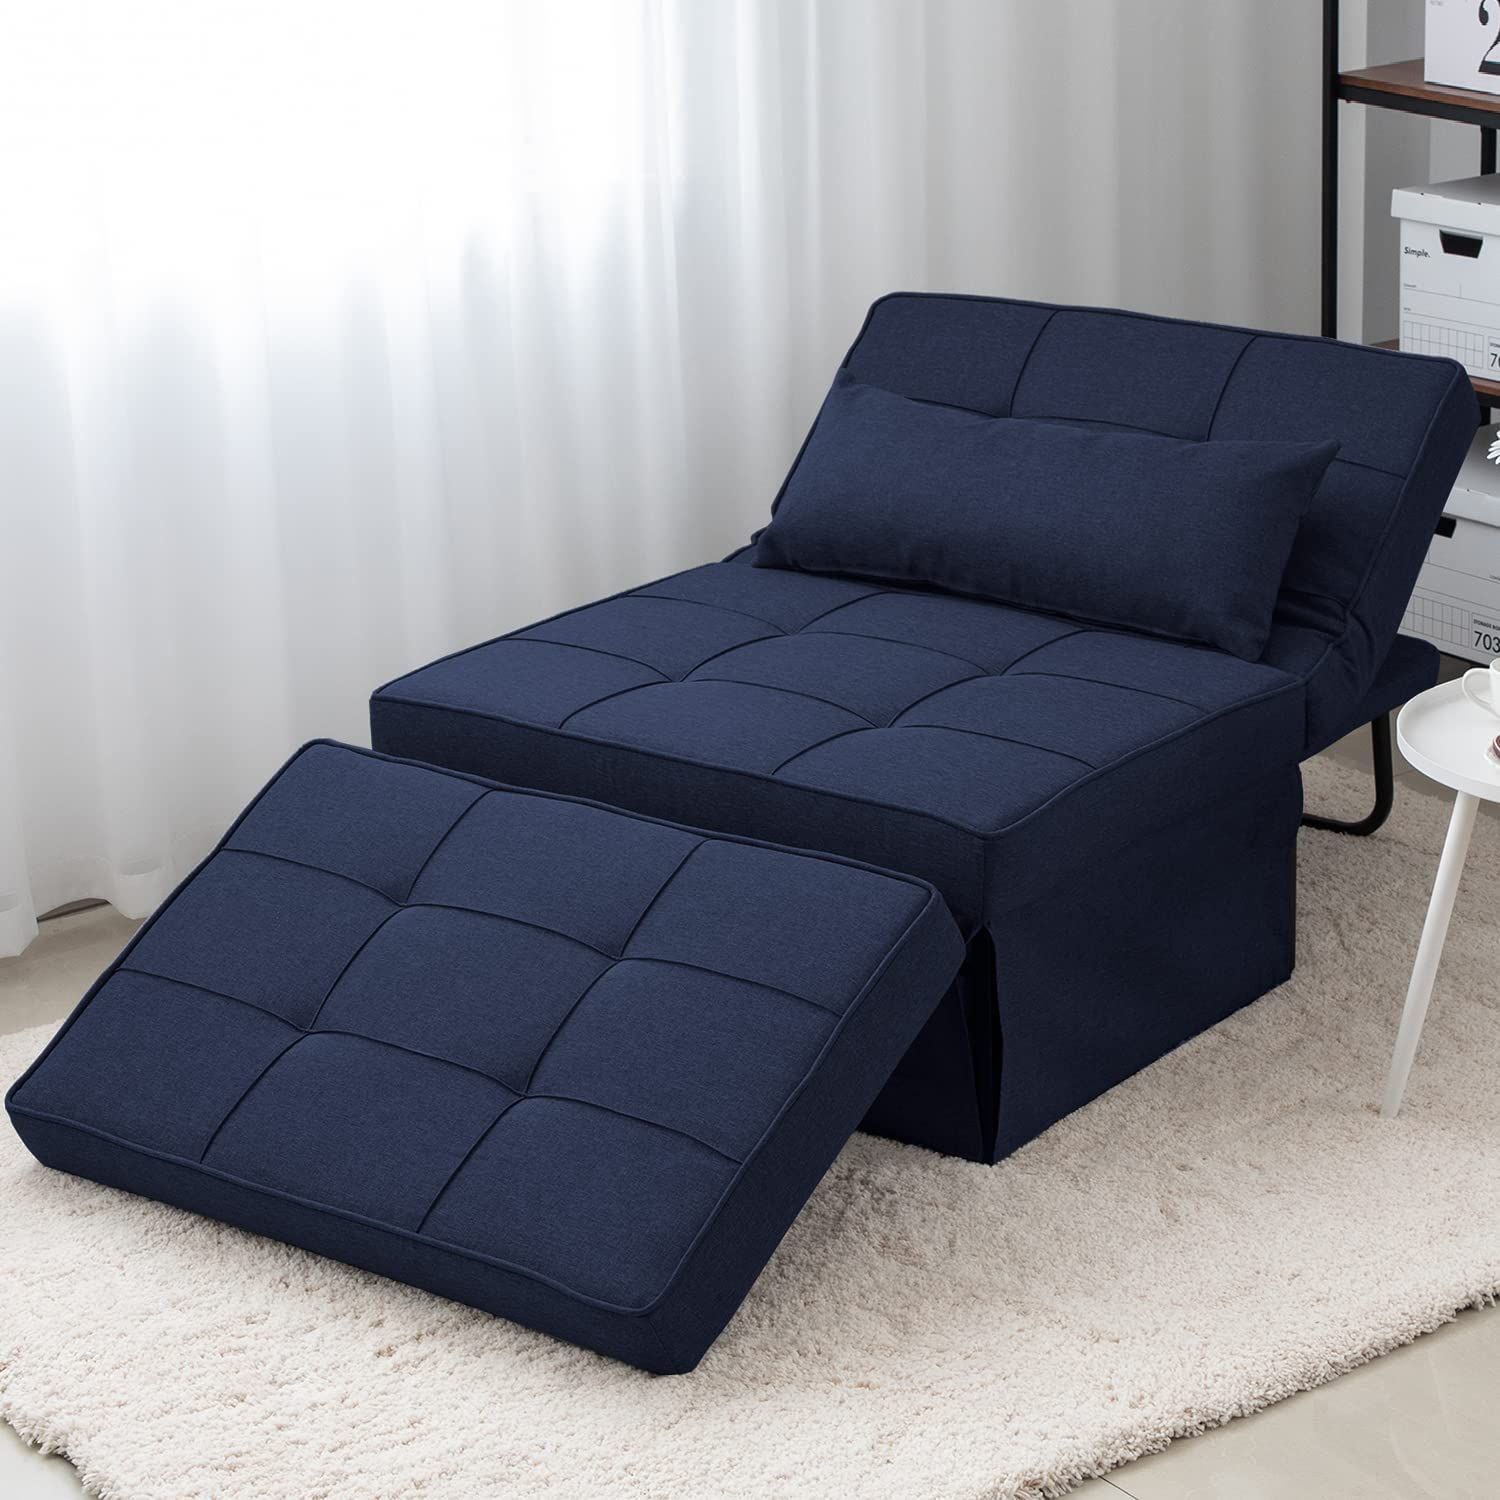 Buy Joyhom Folding Ottoman Sofa Bed, Convertible Chair 4 In 1  Multi Function Modern Breathable Linen Guest Bed With 5 Position Adjustable  Backrest (dark Blue) Online At Lowest Price In Ubuy Kosovo (View 1 of 15)